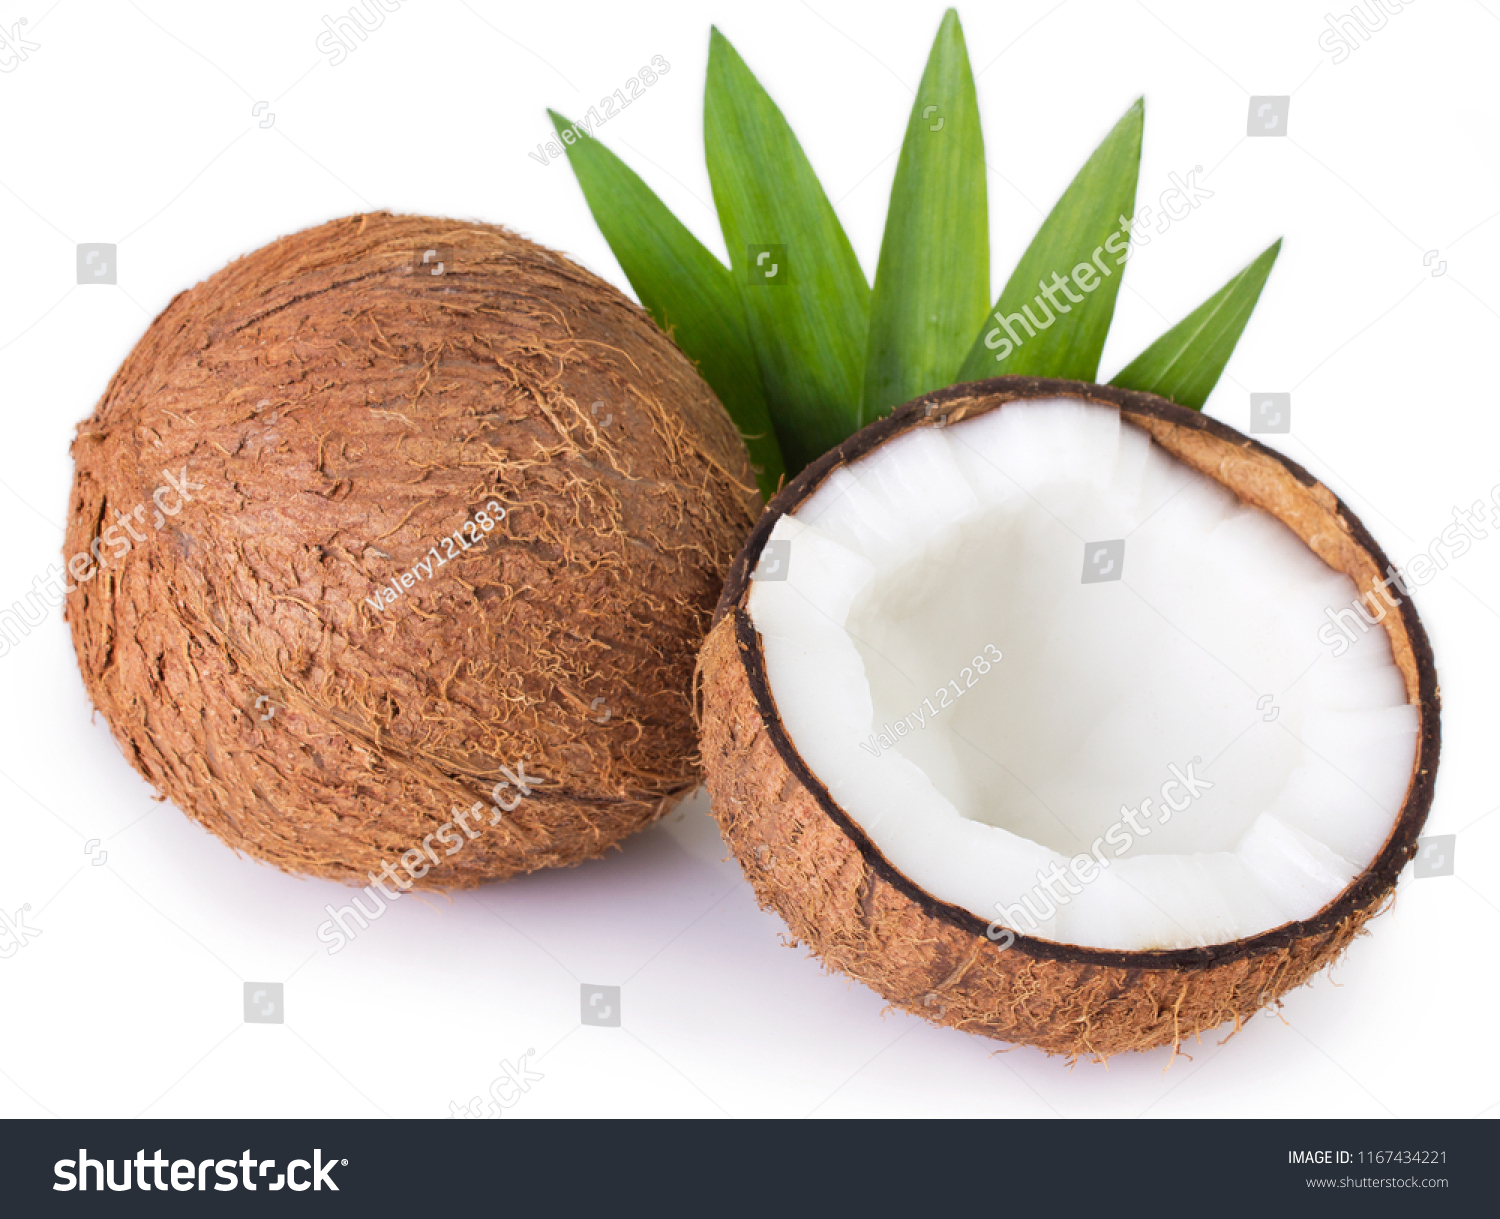 coconut isolated on white background #1167434221